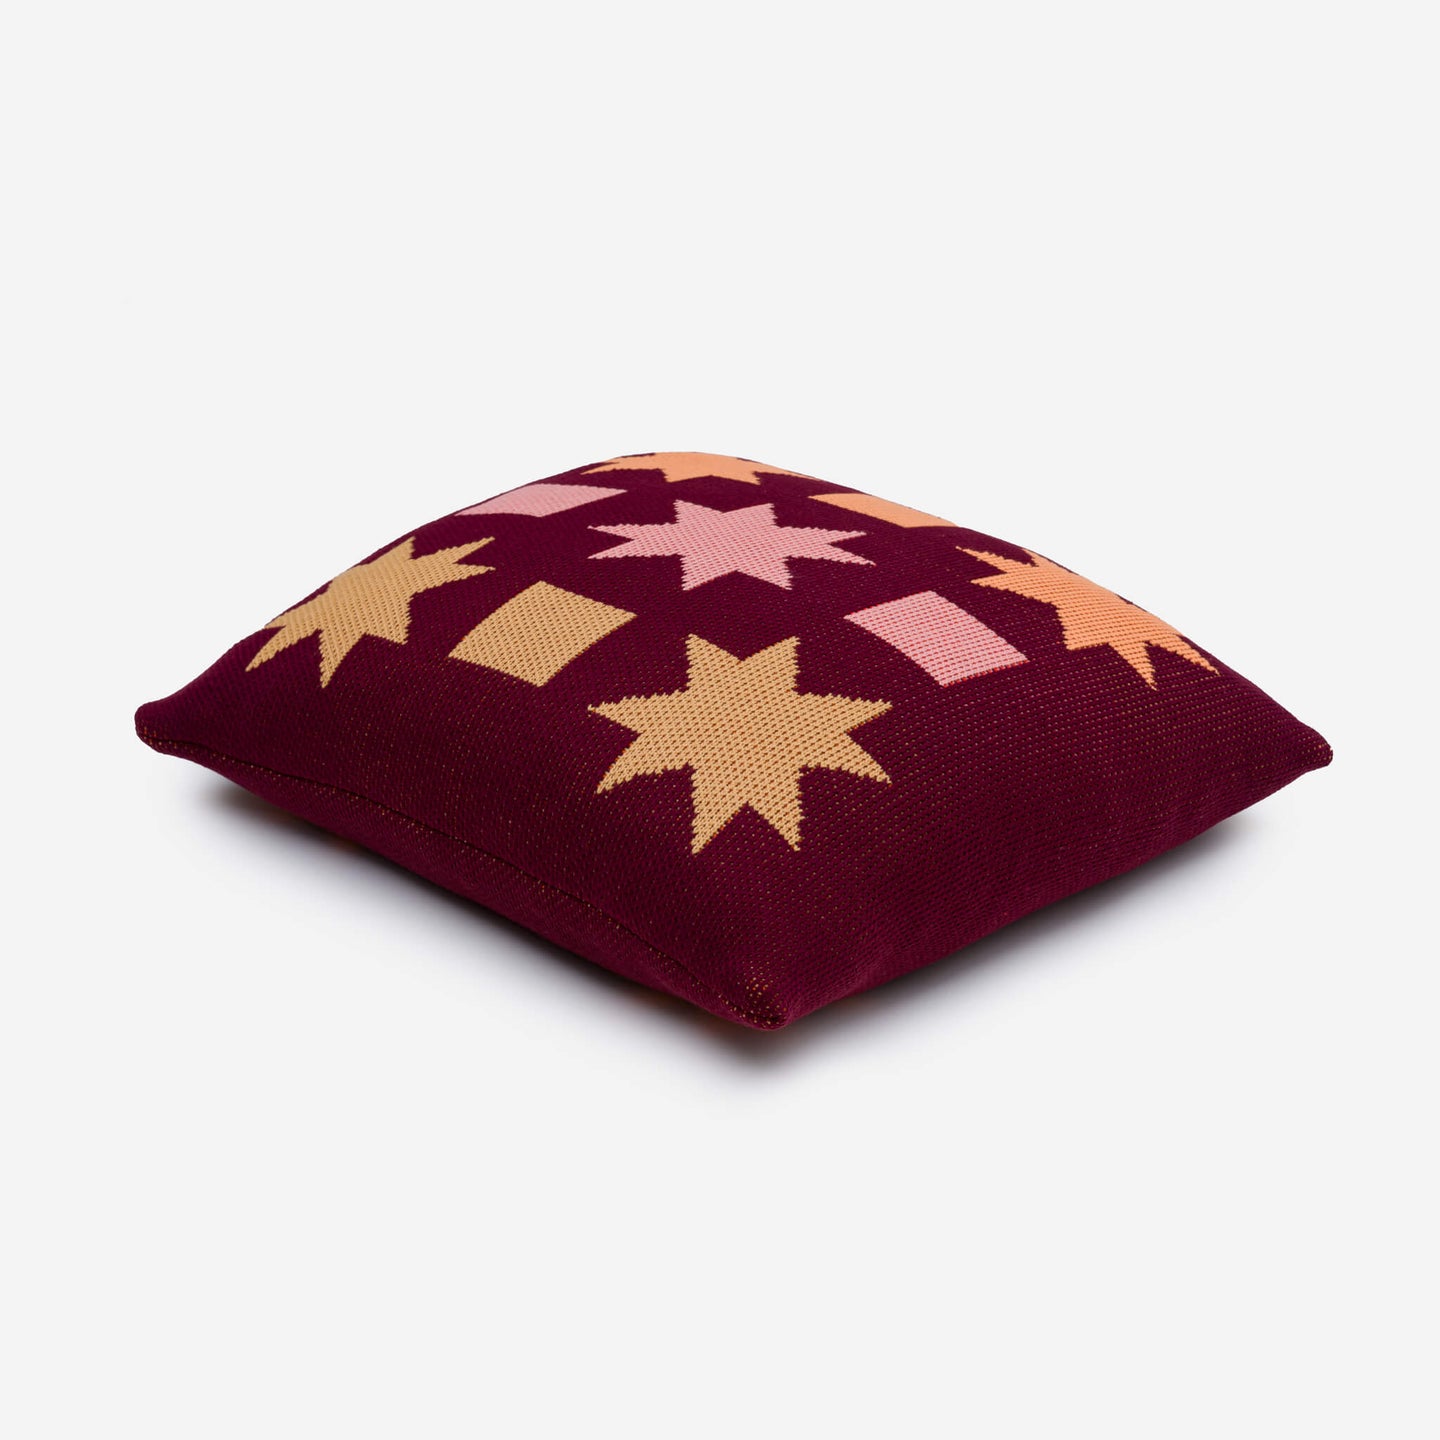 Quilt Star Pillow Knit Cover Graphic Bold Accent Reversible